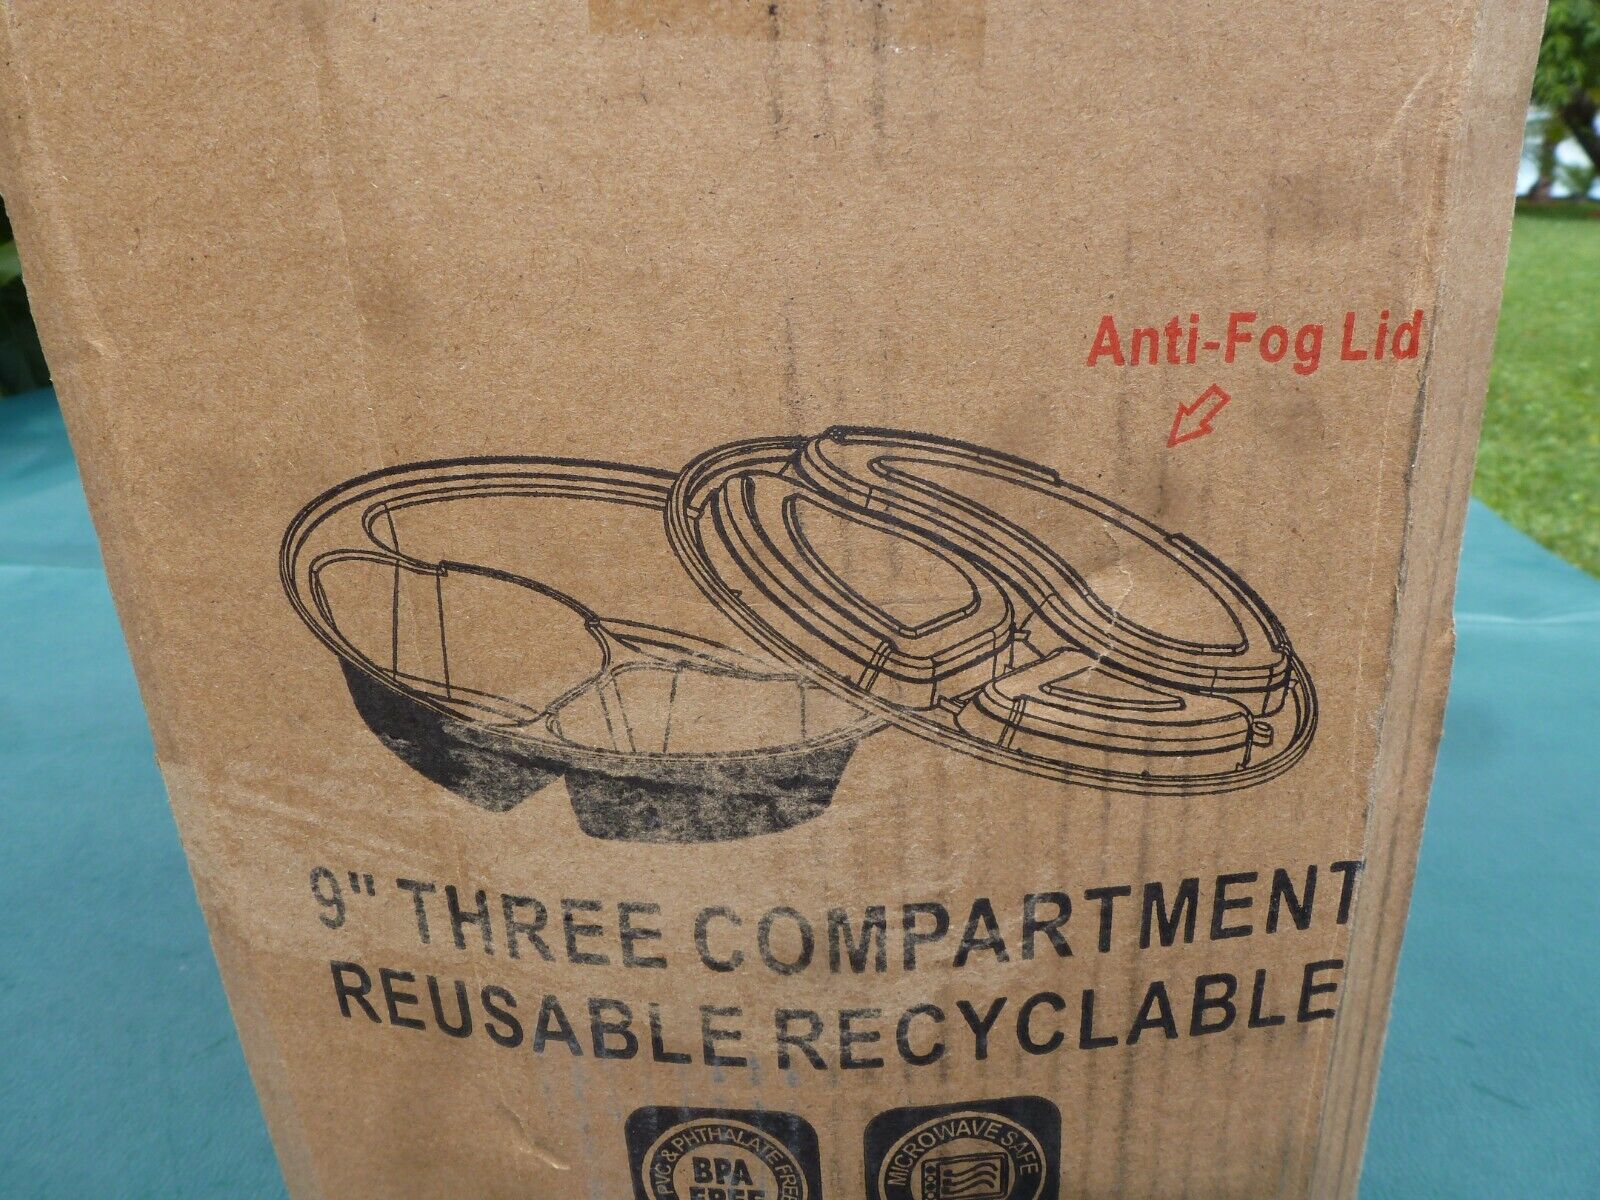 3-Compartment Reusable Recyclable Plates With Anti Fog Lids SR-9388b 145 Count Без бренда - фотография #11